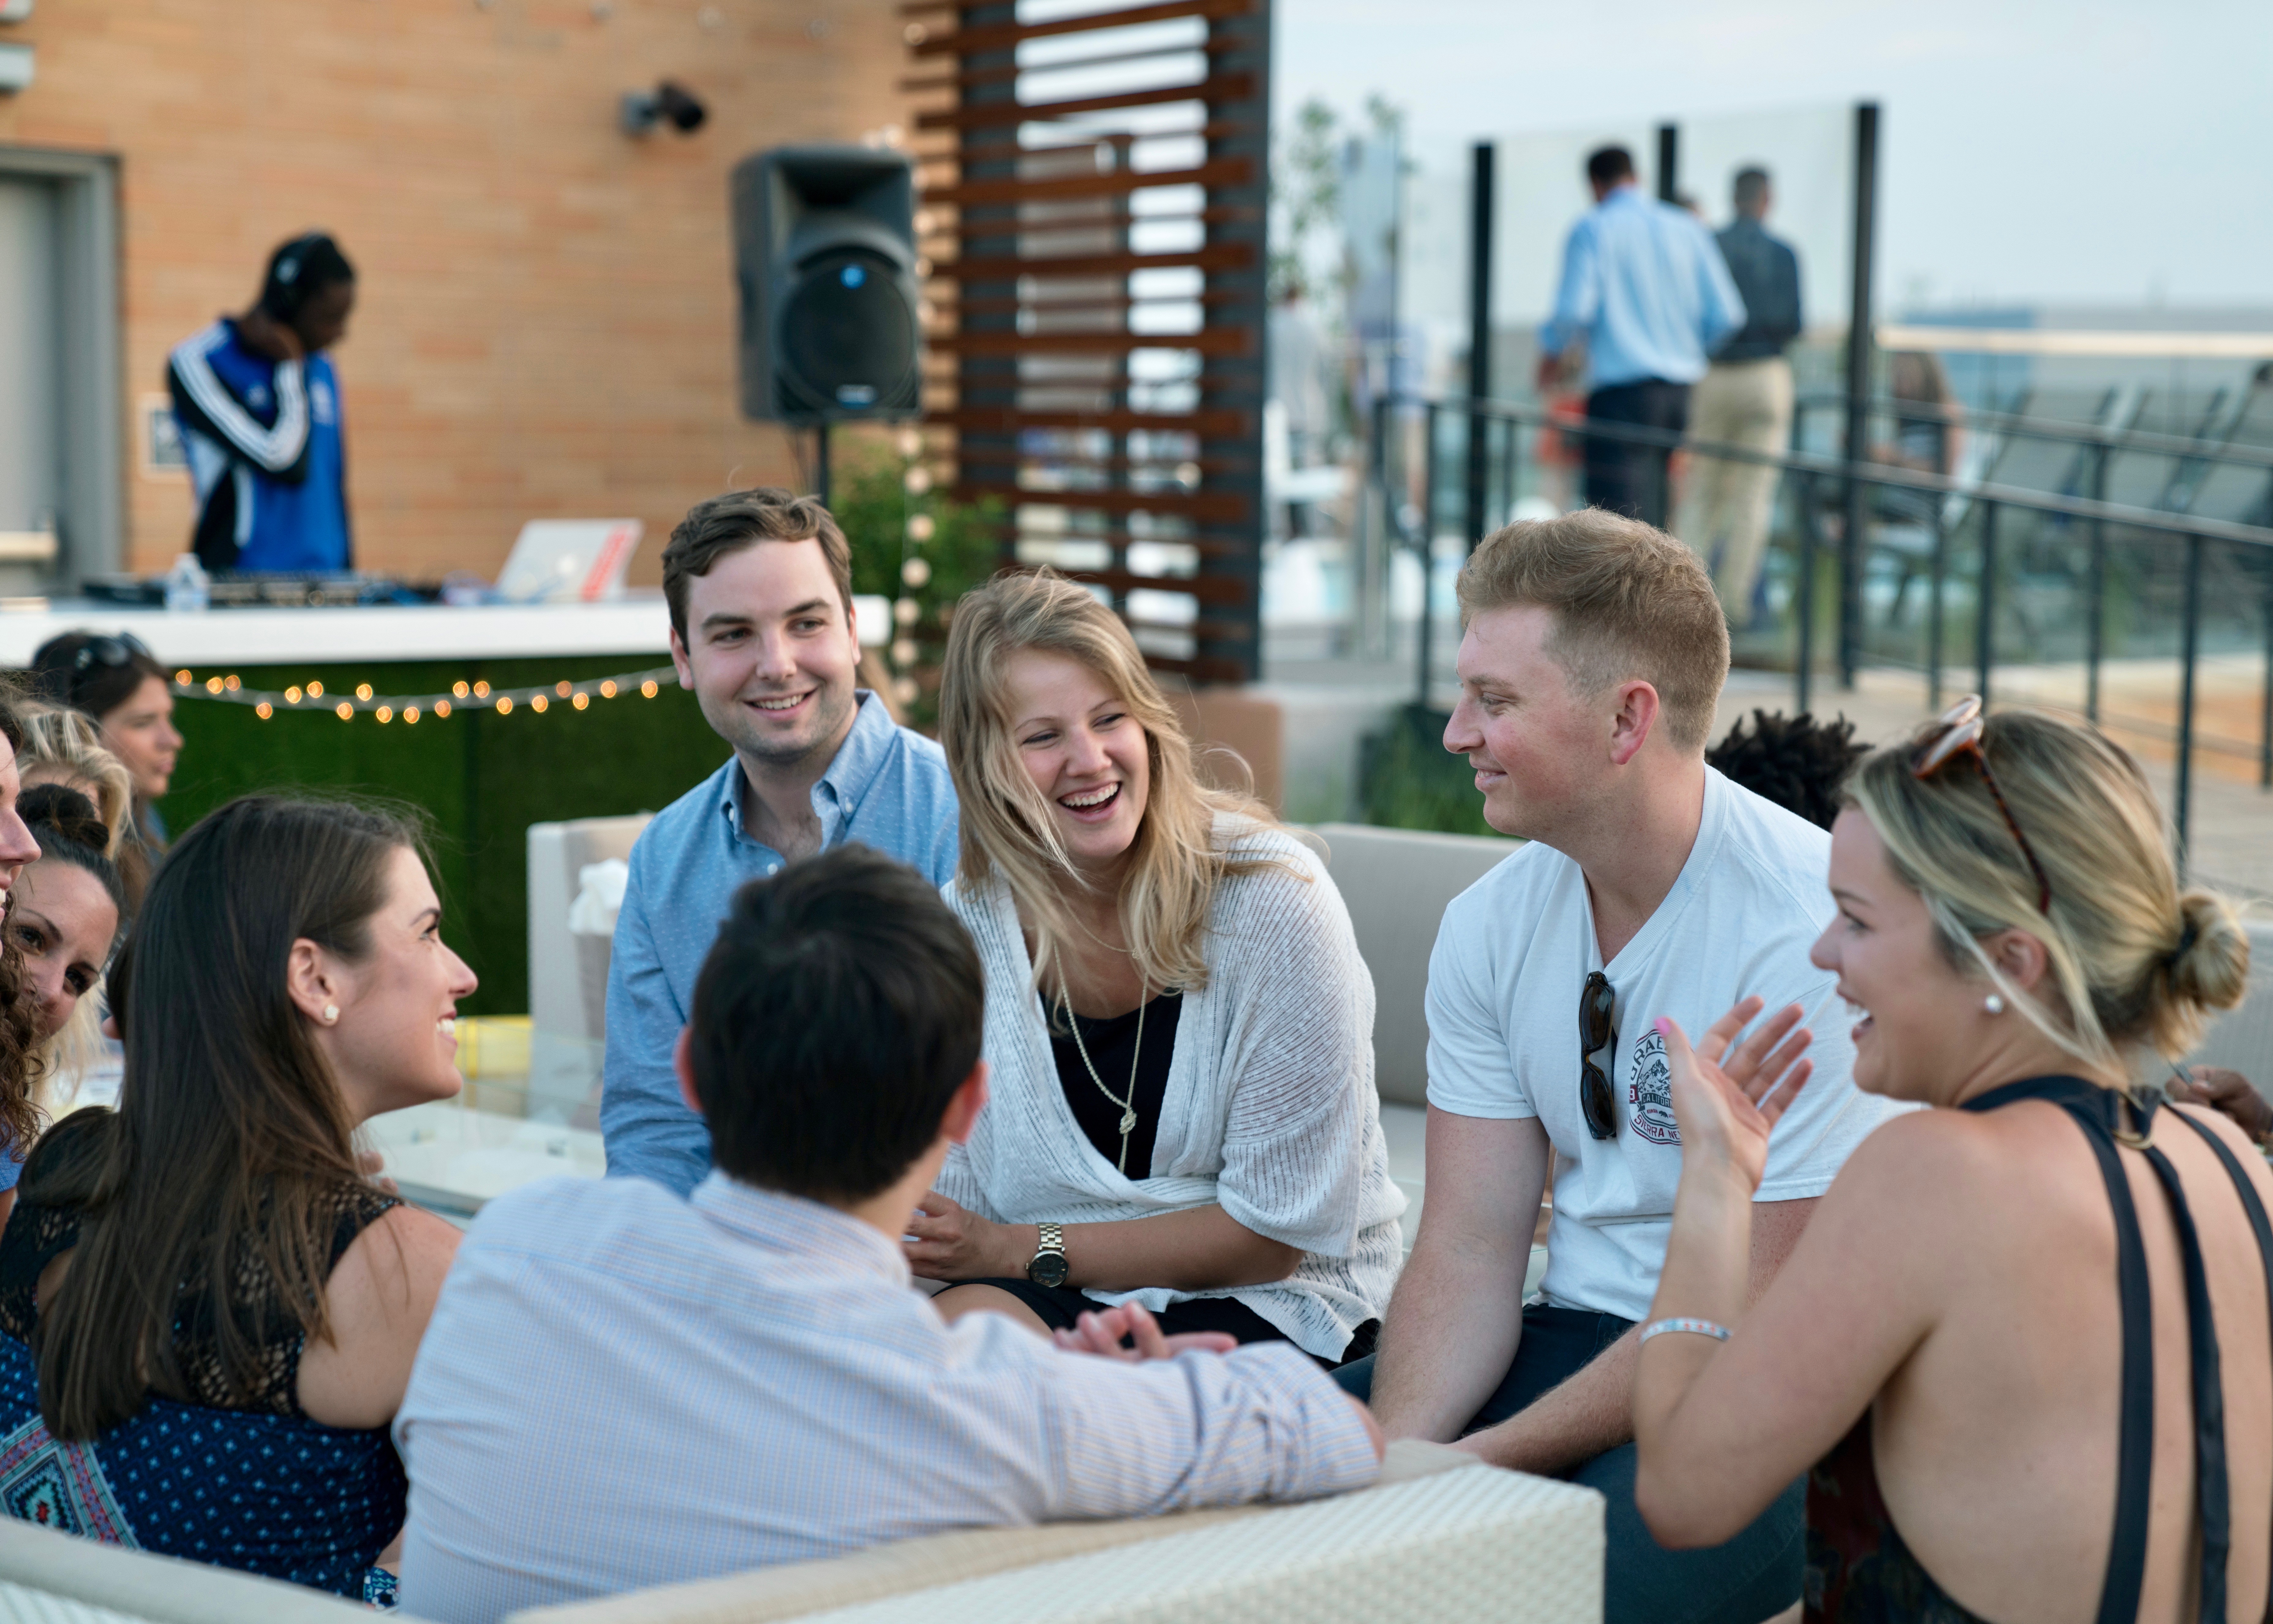 Party-goers enjoyed great food, music, art and ambience at our rooftop party